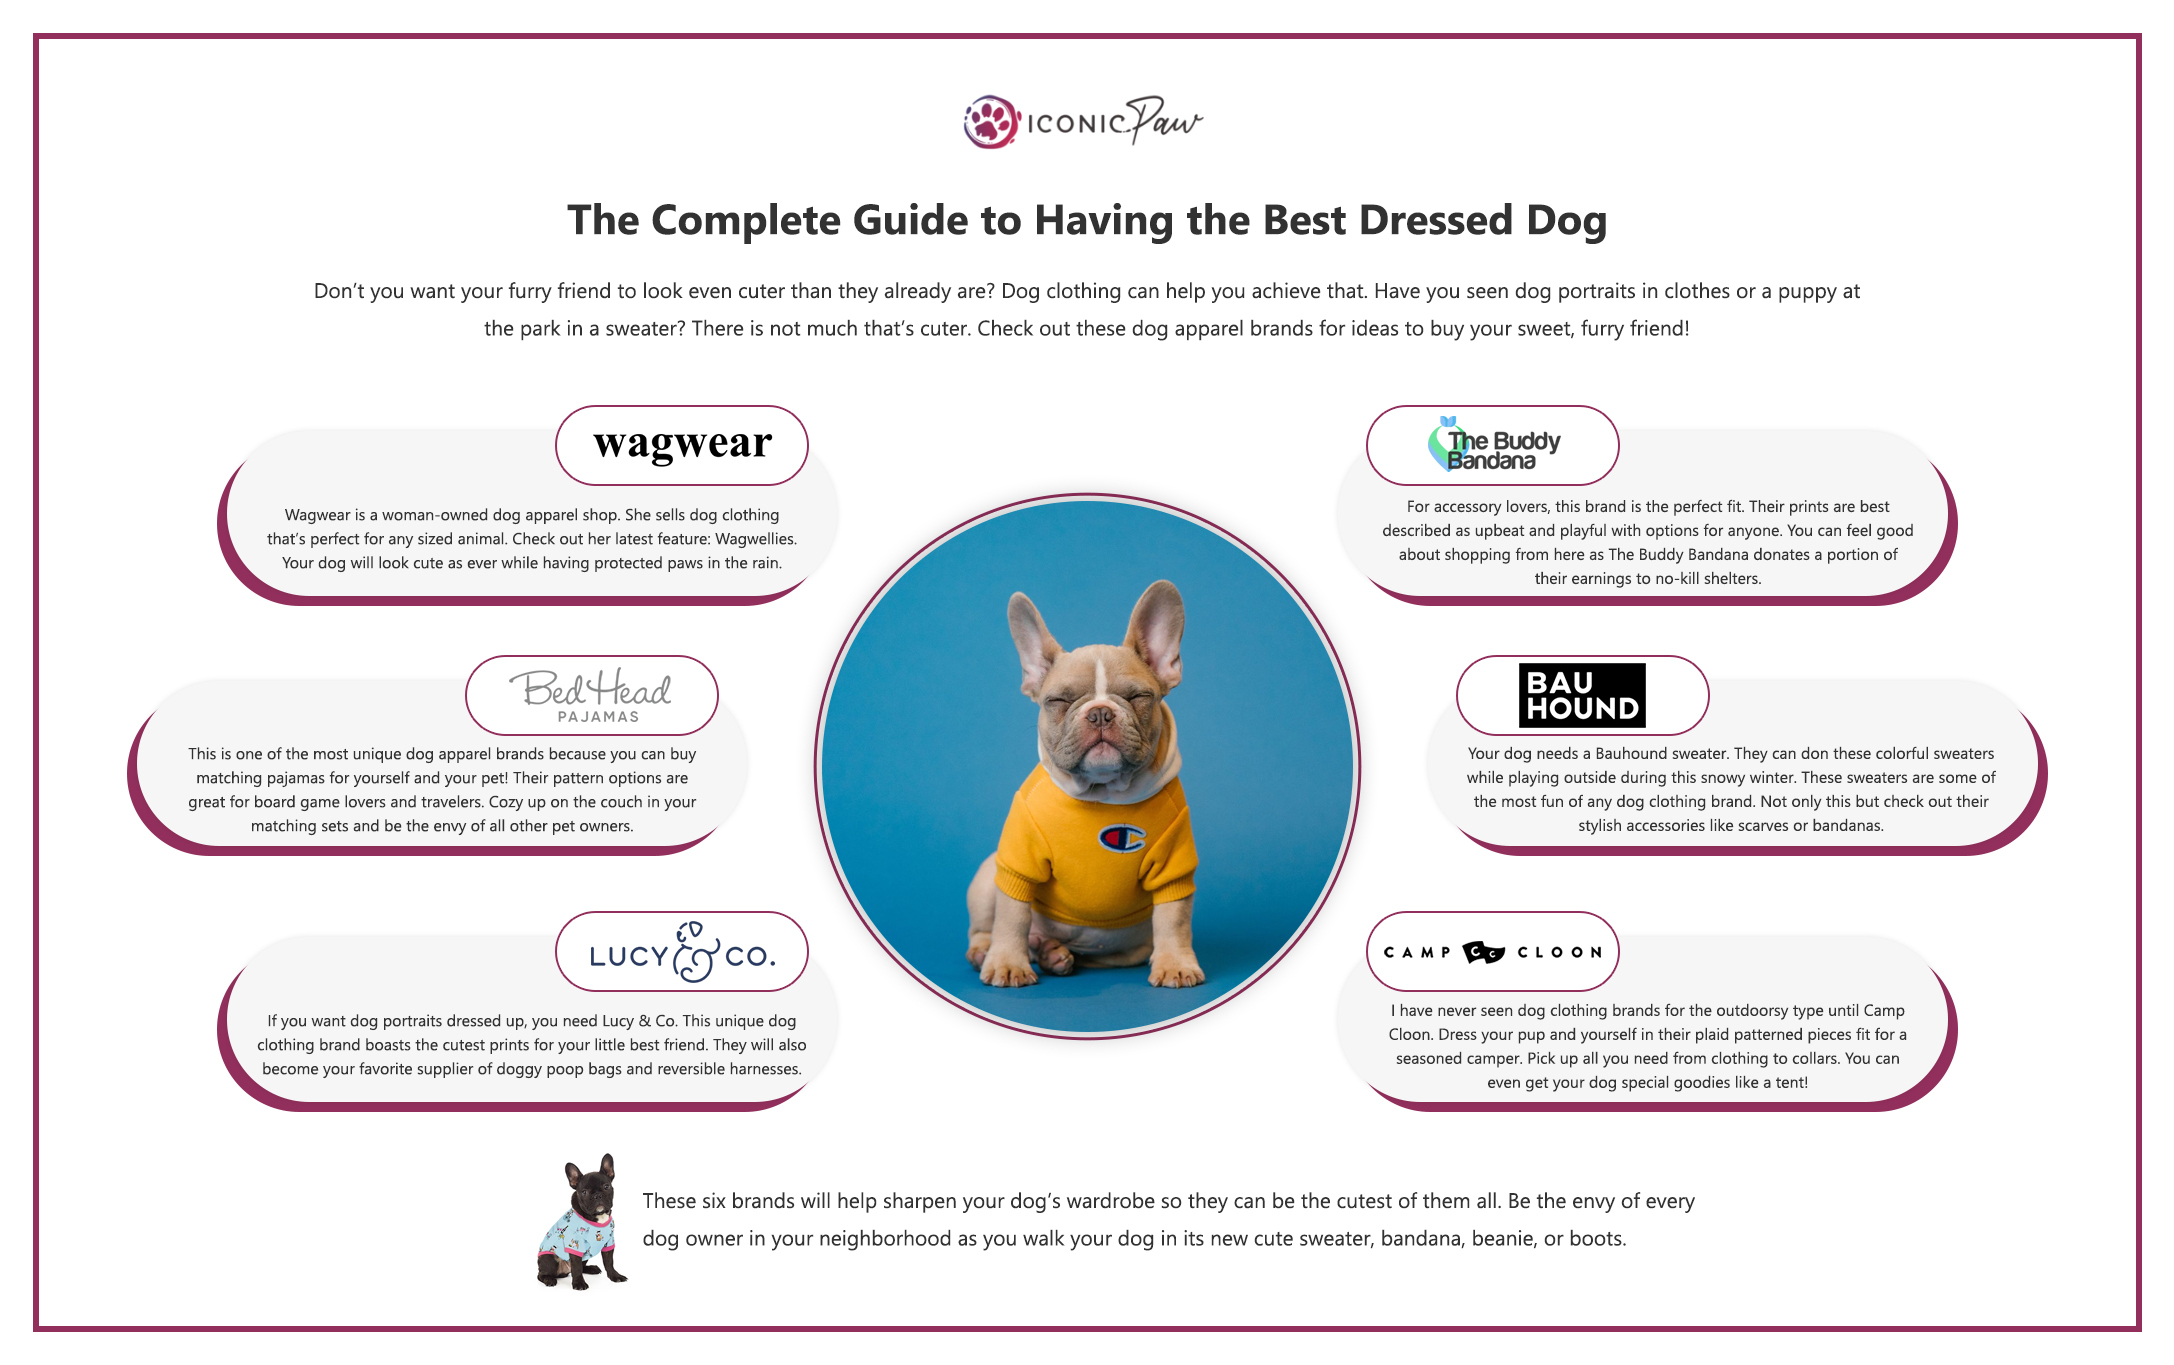 The Complete Guide to Having the Best Dressed Dog infographics